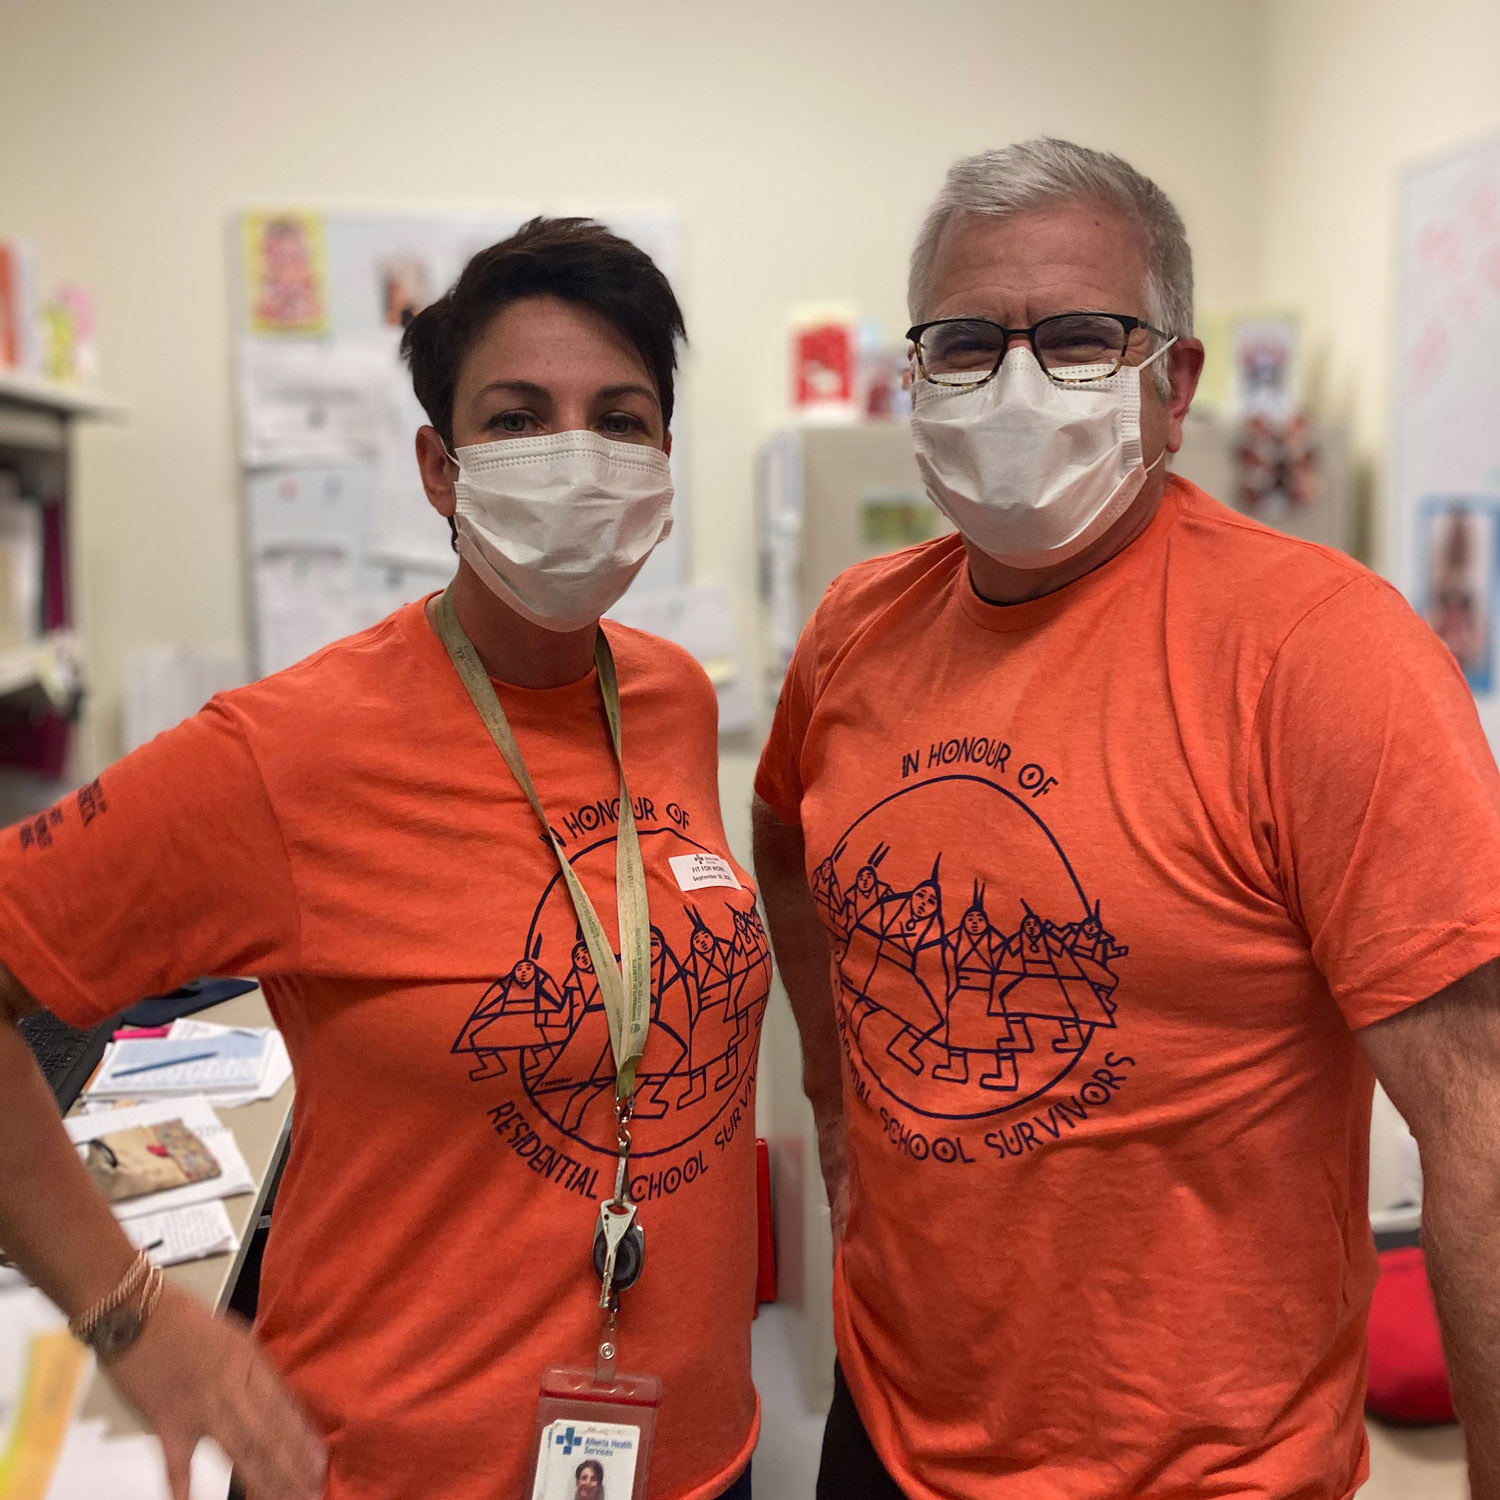 Janice Dominguez and Dr. Blaine AuCoin in orange shirts